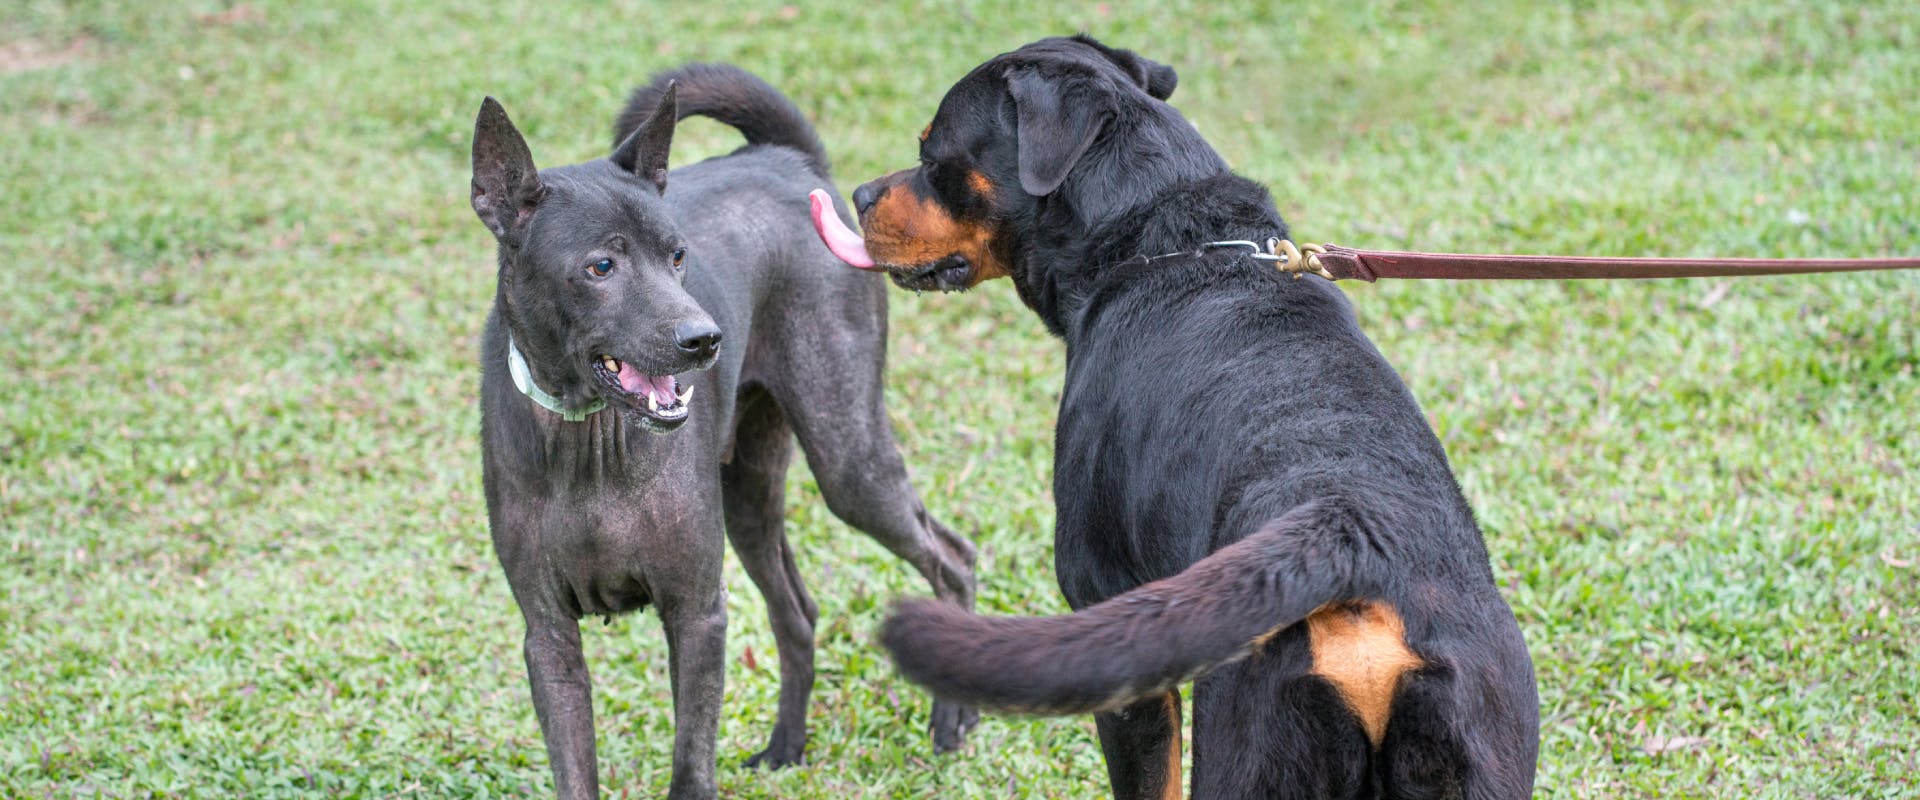 a large black and brown dog licking the air next to a large black dog in a park 